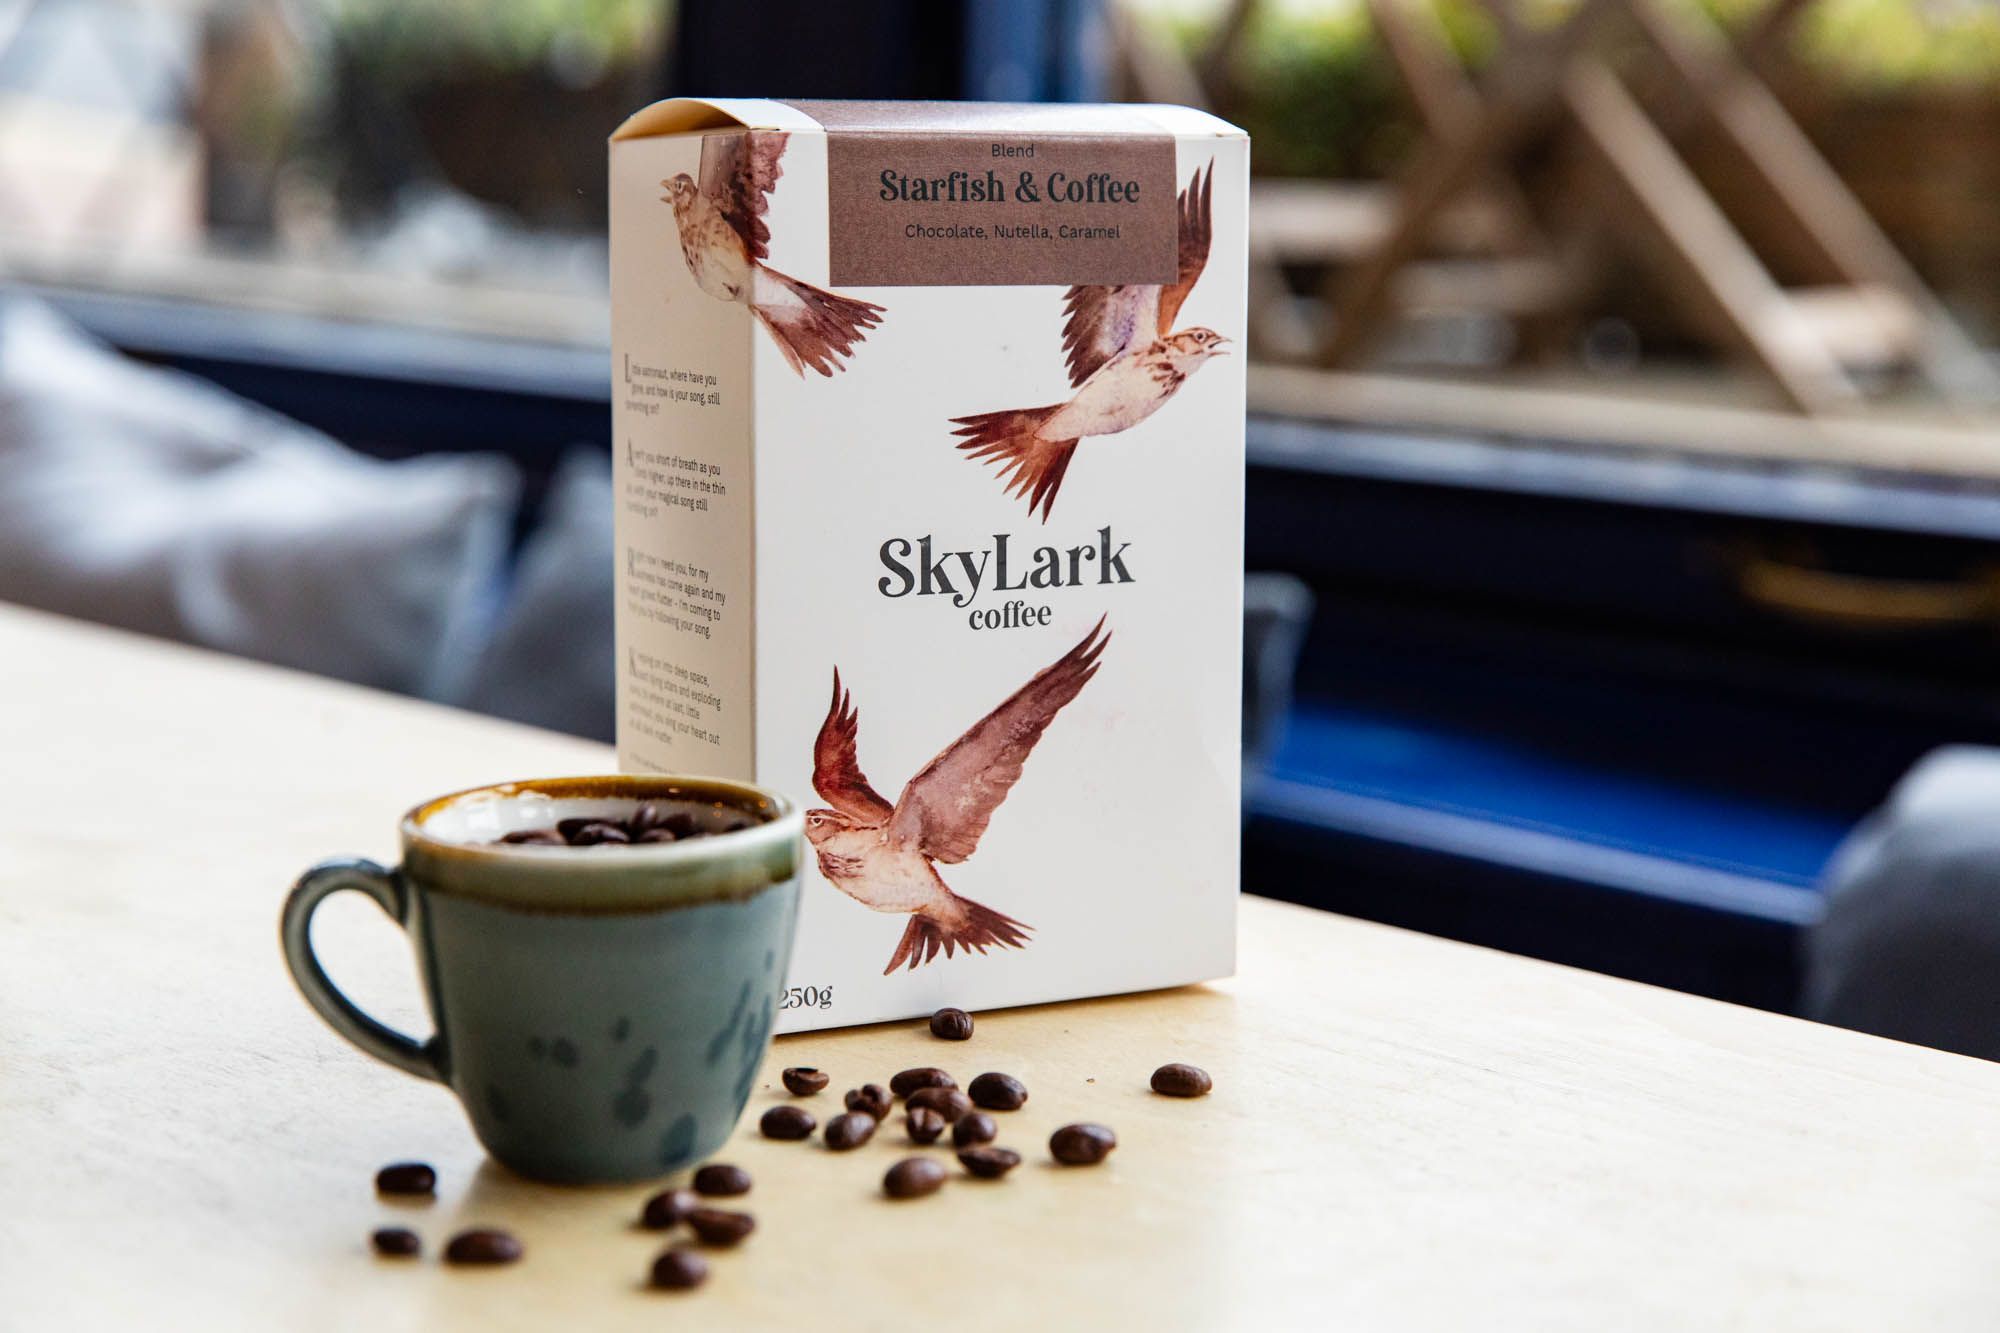 box of skylark coffee with small cup with coffee seeds inside